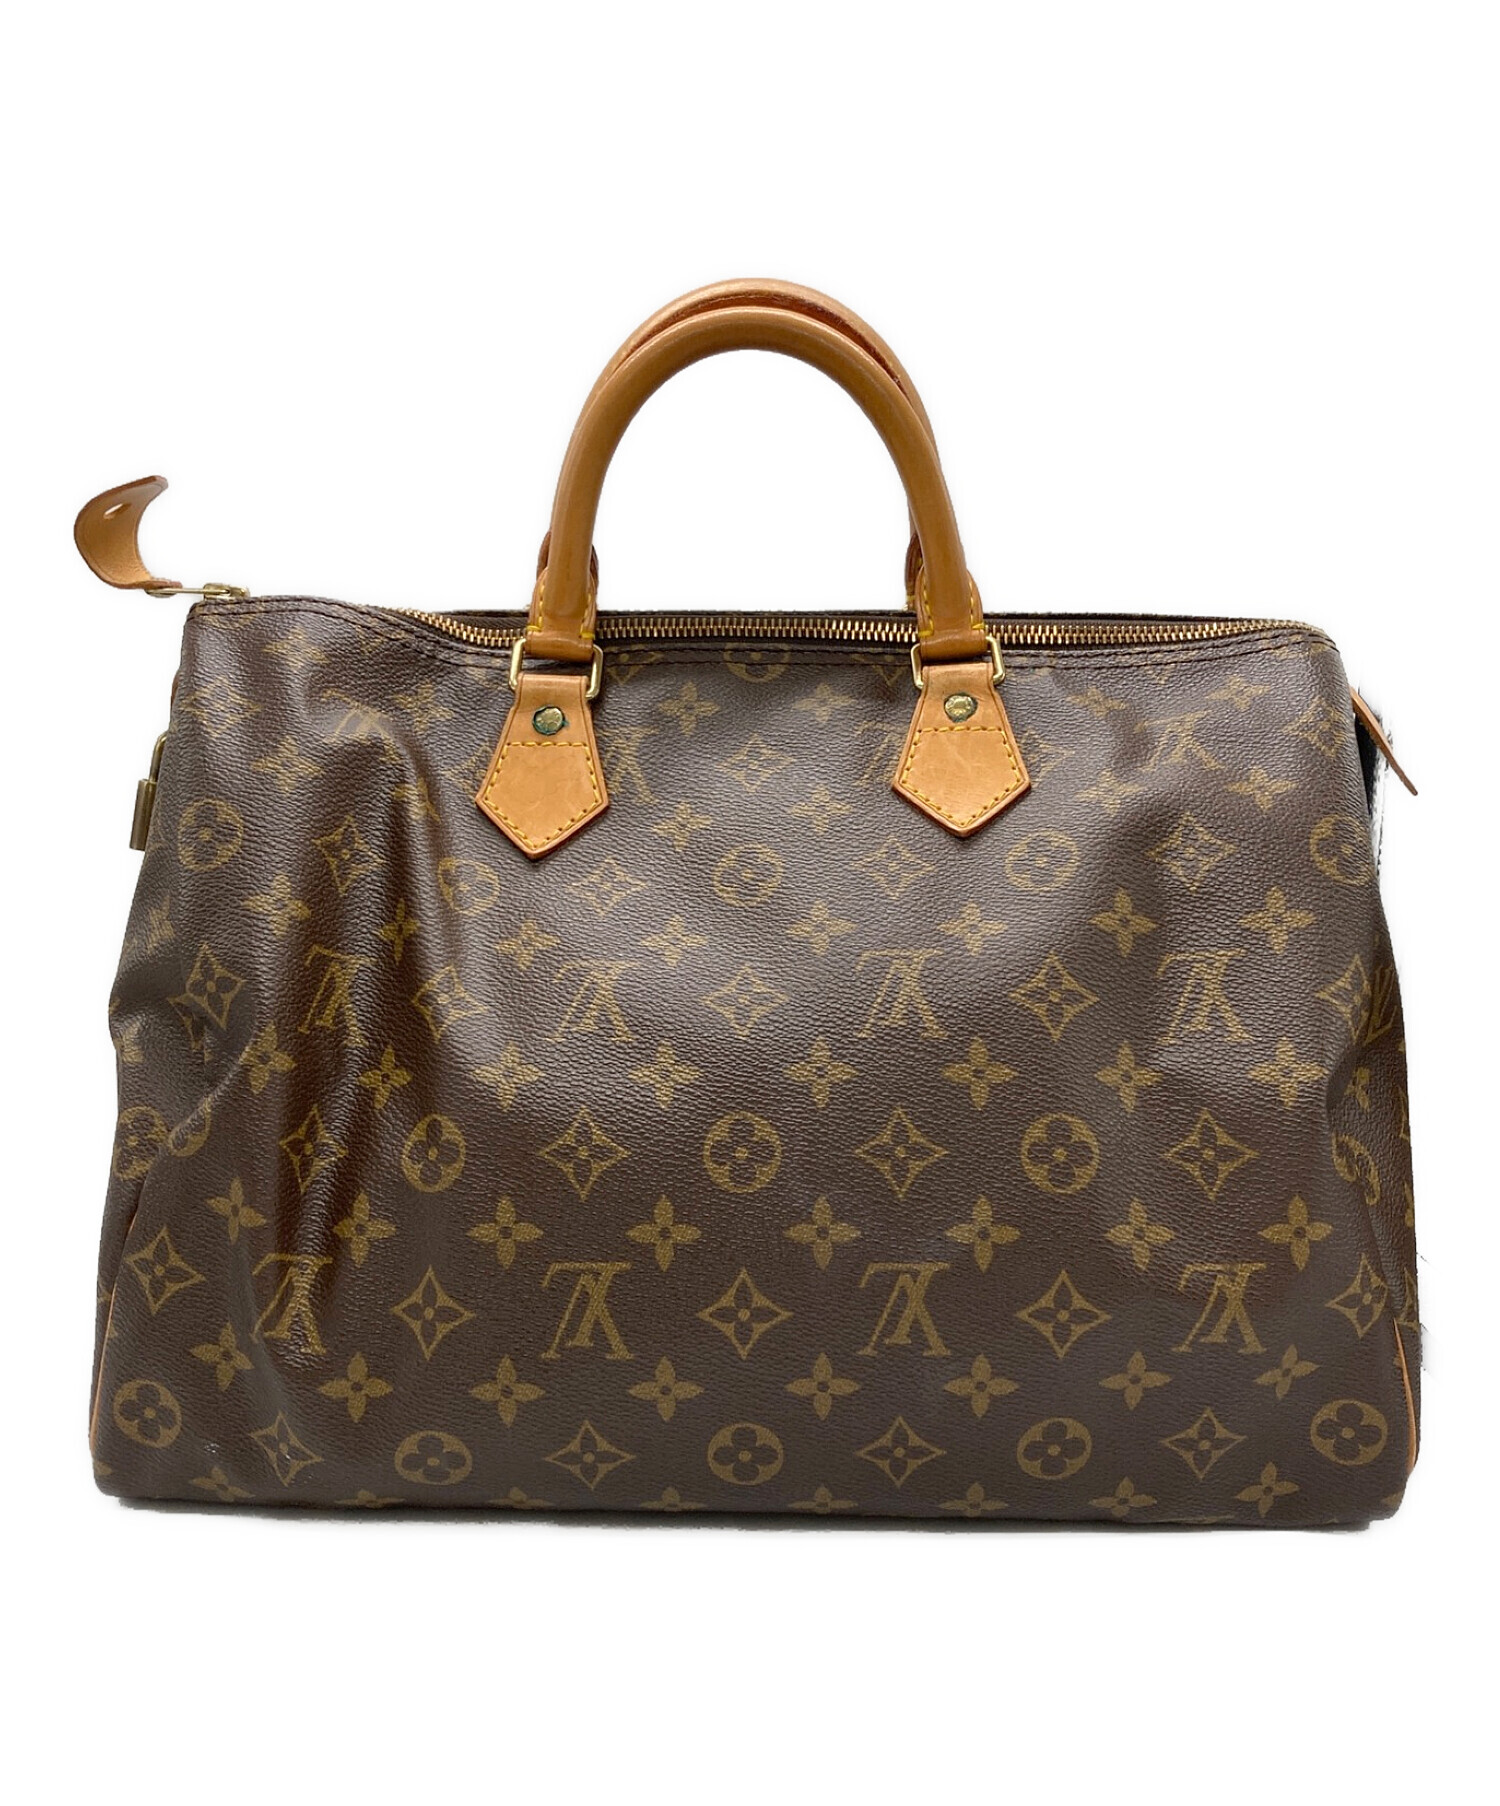 LOUIS VUITTON ルイヴィトン バッグ（その他） 35 茶系(総柄)